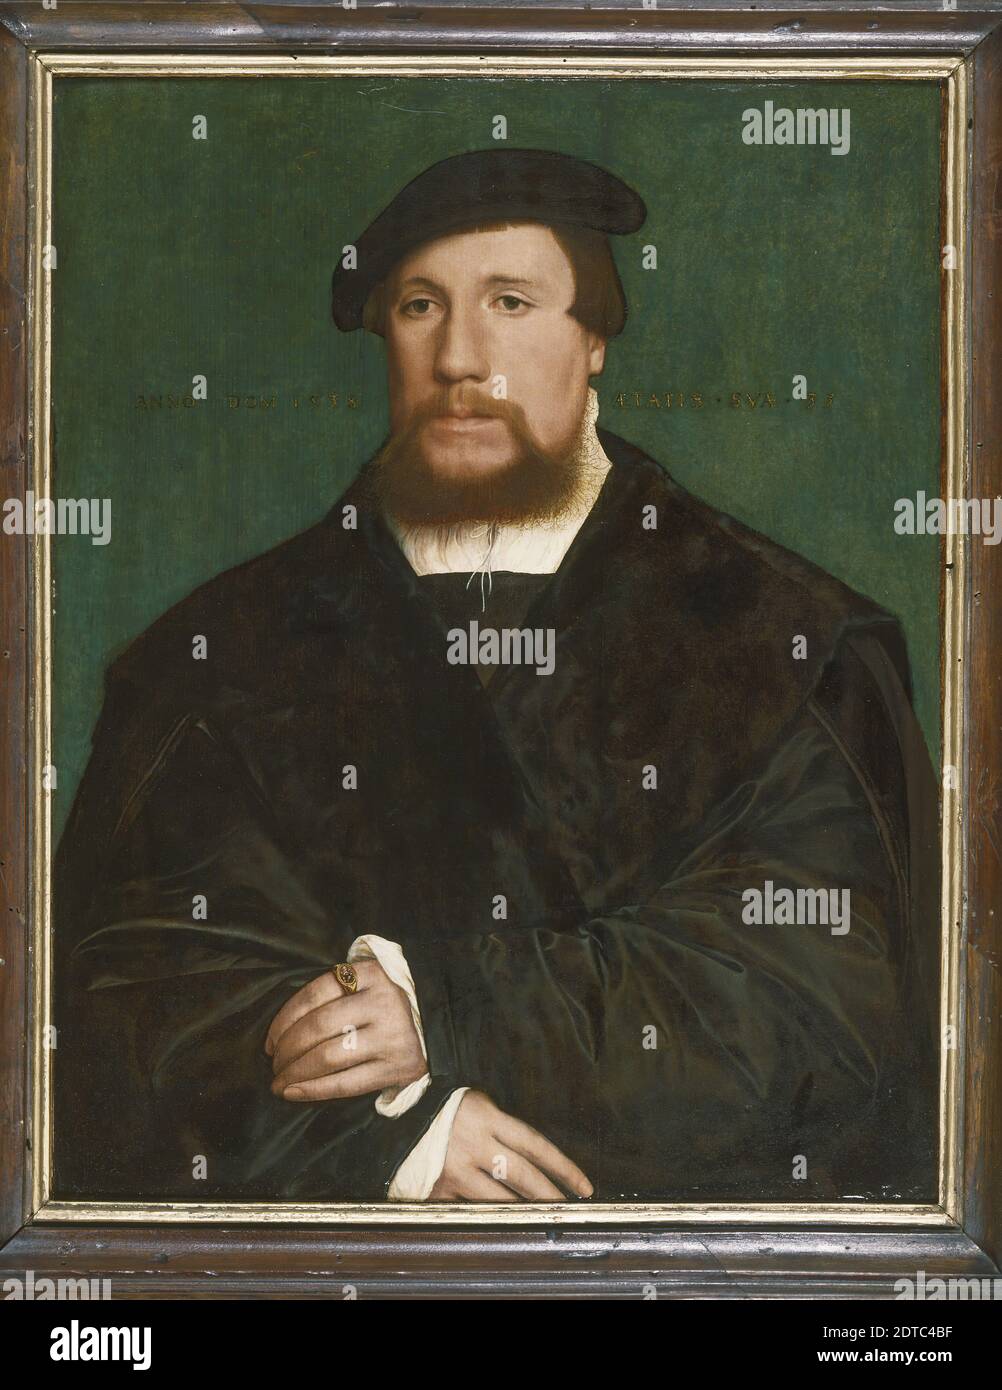 Artist: Hans Holbein the Younger, German, 1497/98–1543, Portrait of a Hanseatic Merchant, Oil on panel, unframed: 49.6 × 39 cm (19 1/2 × 15 3/8 in.), The merchants of the Hanseatic League, a powerful German trading organization that rapidly expanded into other countries along the Baltic and North seas, established their English headquarters in the London Steelyard. Holbein was commissioned to decorate their meeting hall and to produce individual portraits of the guild members. These all adopt the same format, with the sitter represented frontally against an unadorned background. Stock Photo